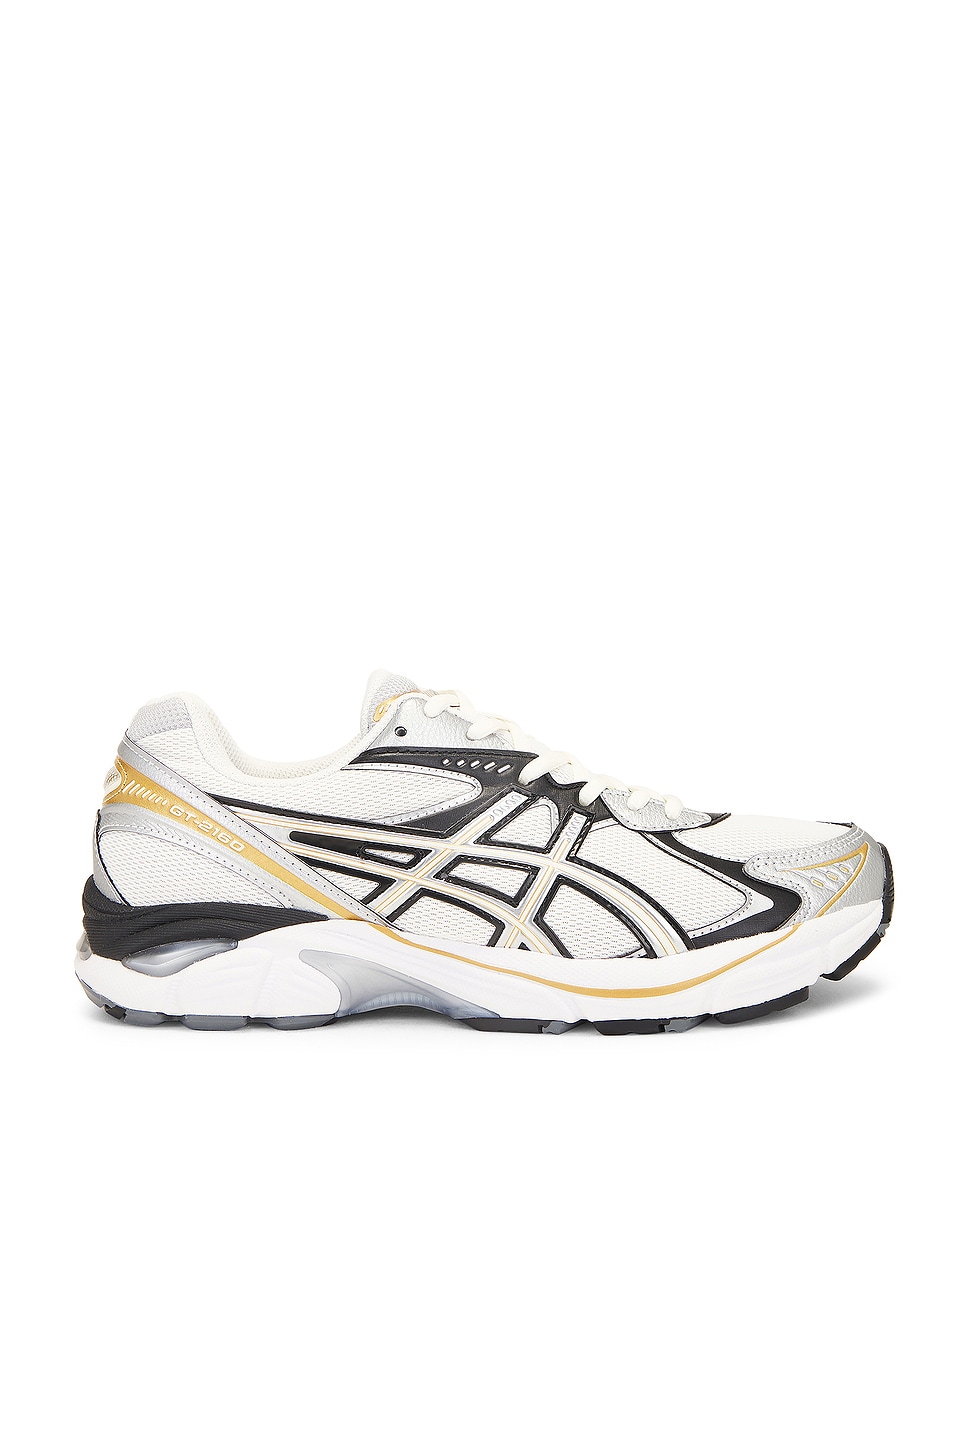 Image 1 of Asics GT-2160 in Cream & Pure Silver